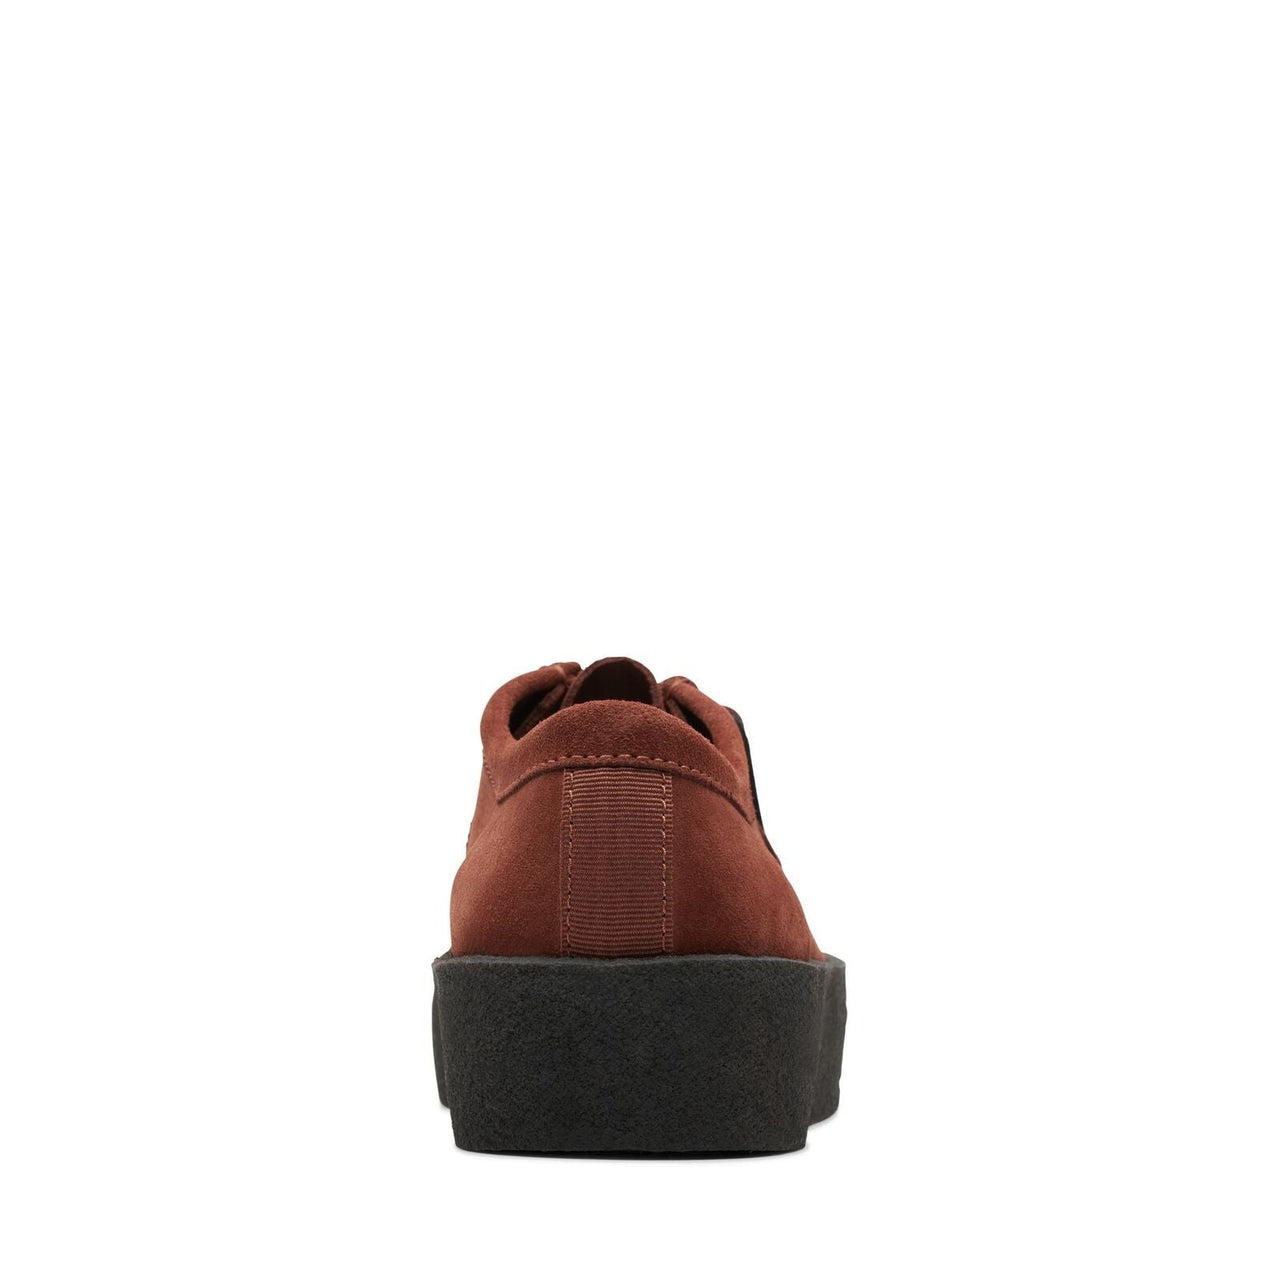  Side view of the Clarks Women's Wallabee Cup Rust Suede 26173658 shoe 